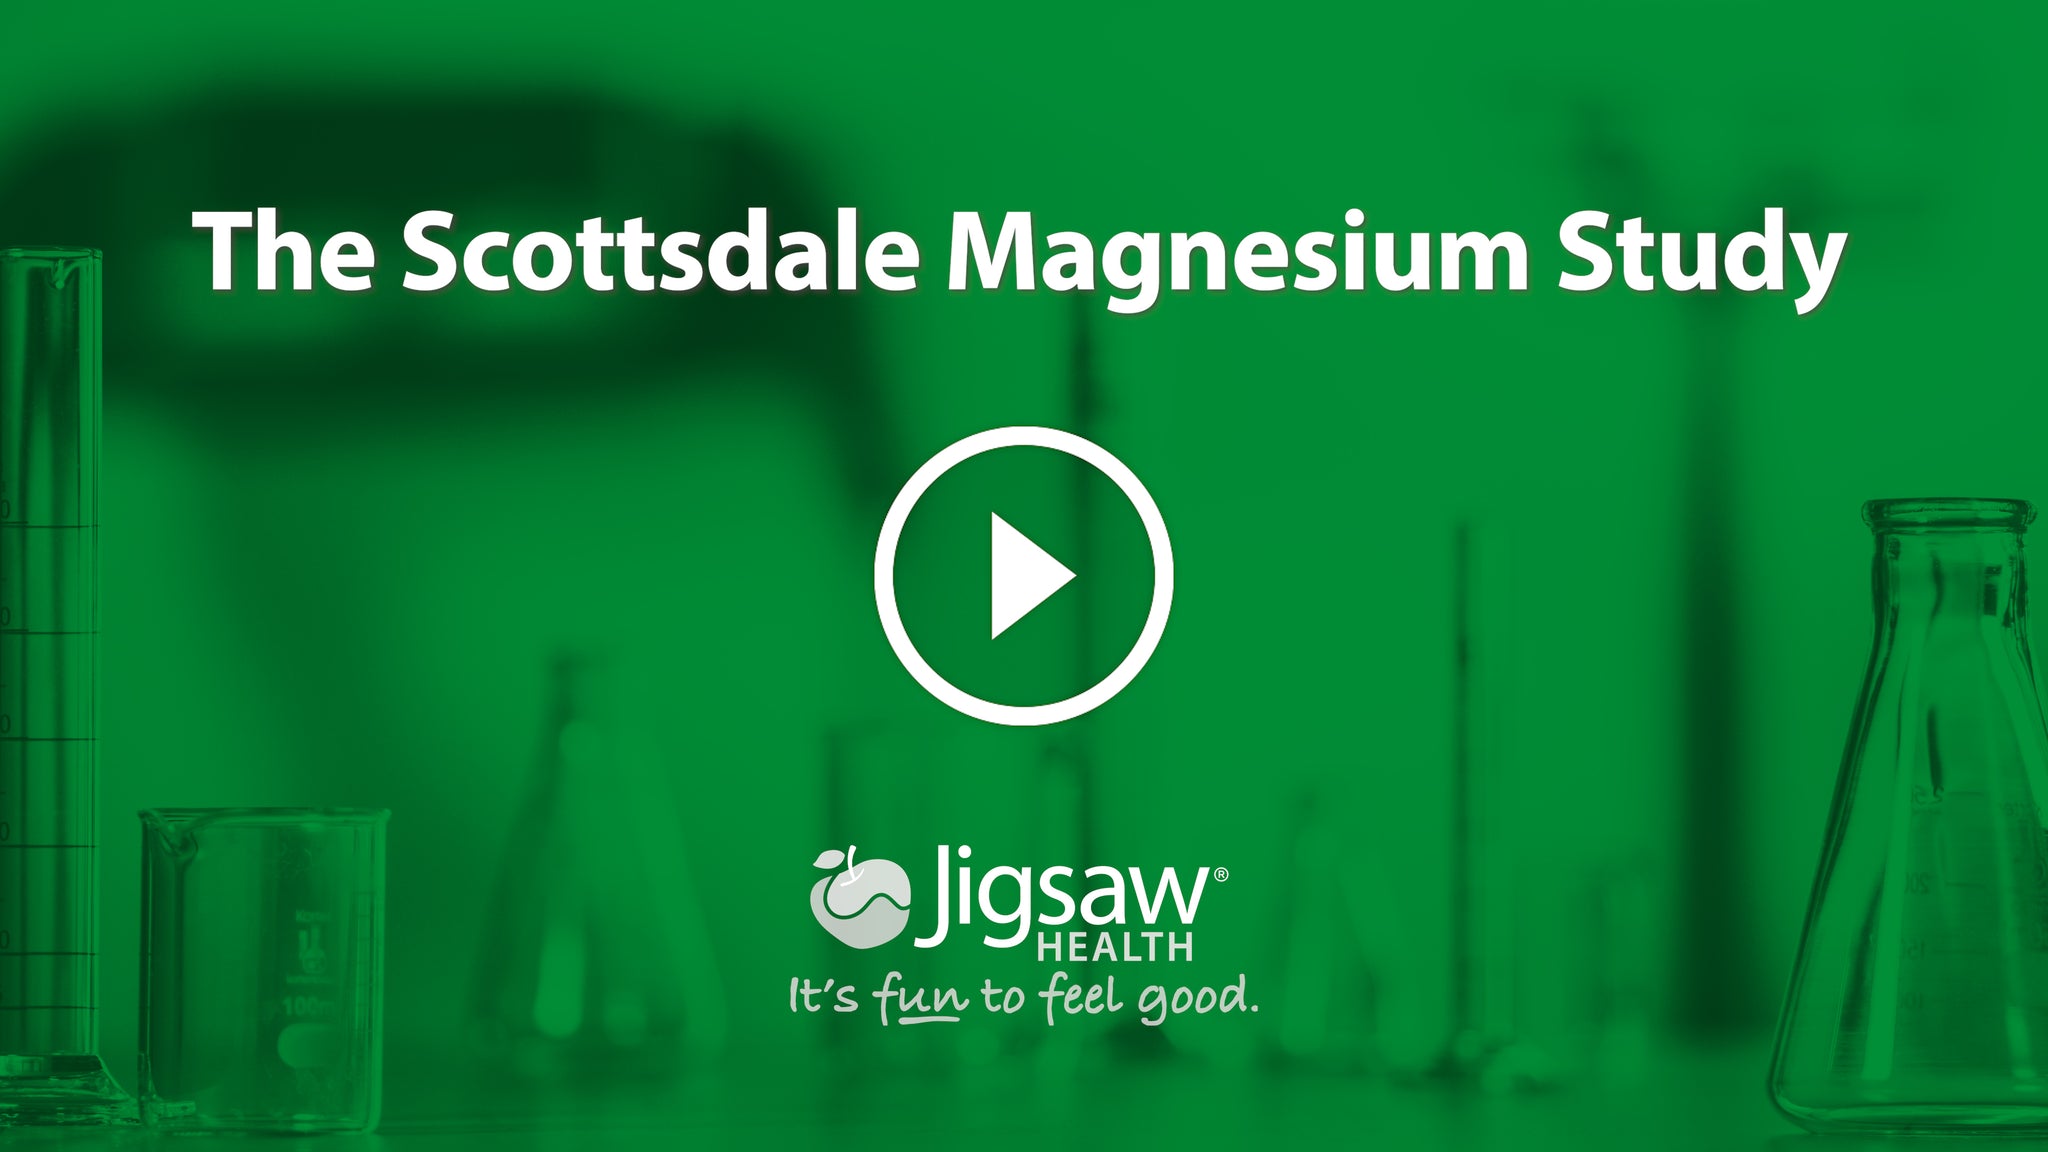 The Scottsdale Magnesium Study by Jigsaw Health